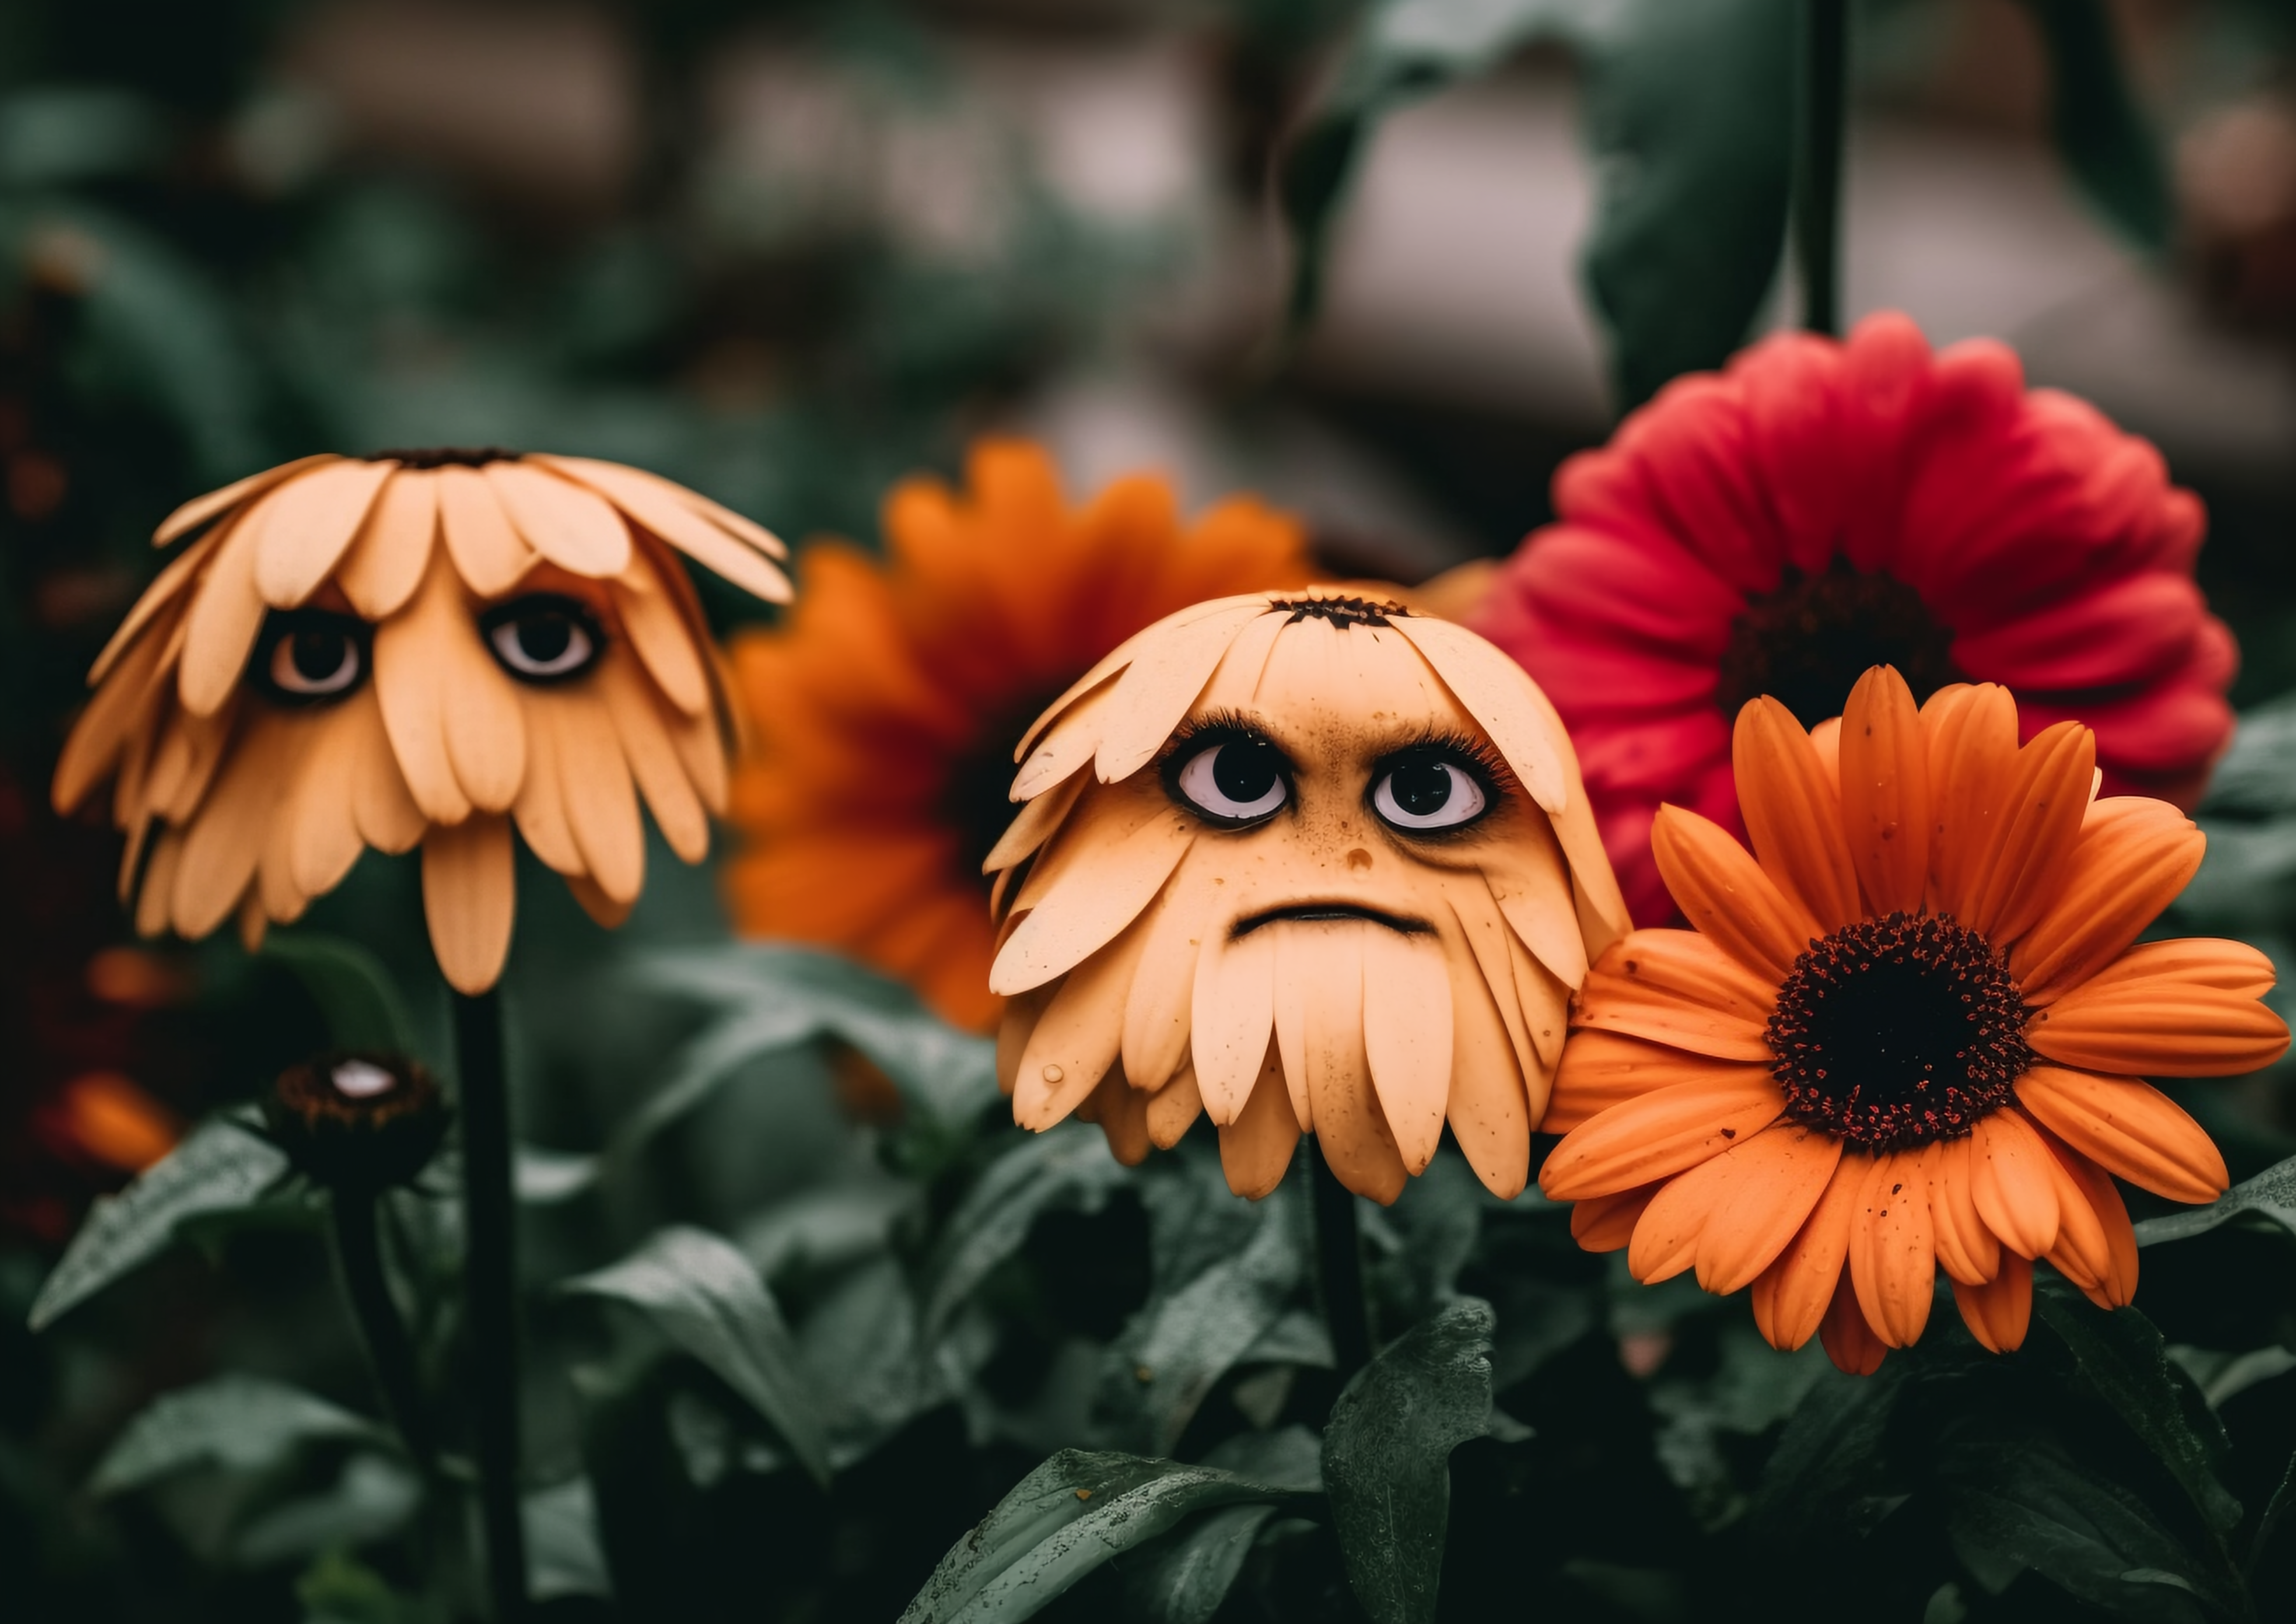 A group of fake flowers with faces on them - 